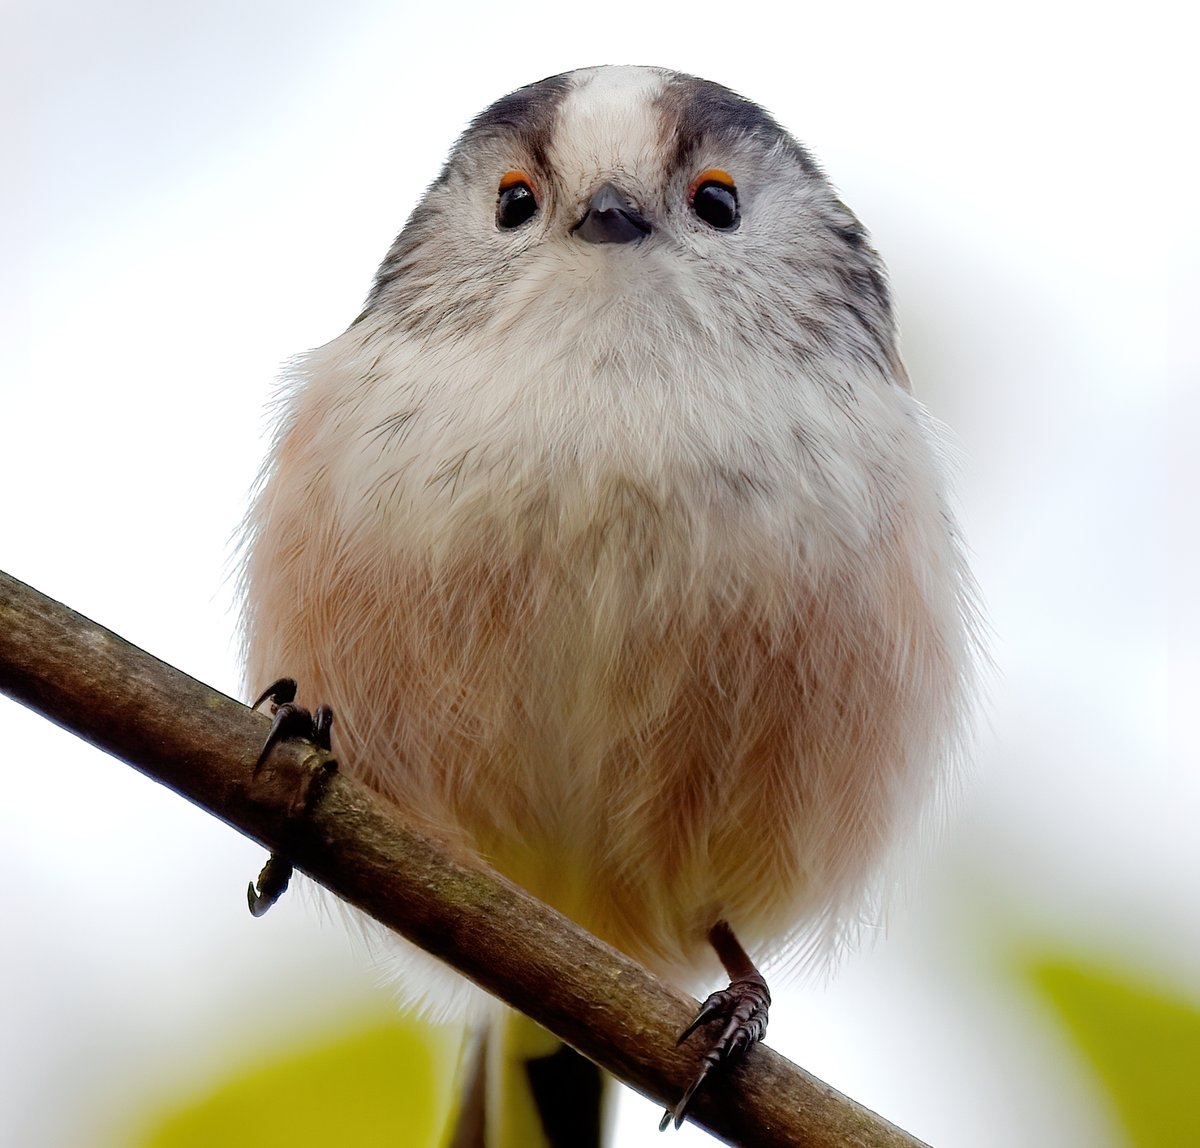 As it's Friday, I'm asking all my followers to please retweet this tweet if you see it, to help my little bird account beat the algorithm & be seen!🙏♥️ To make it worth sharing, here's the adorable face of a Long Tailed Tit! 😍😊🐦 #FridayRetweetPlease ♥️